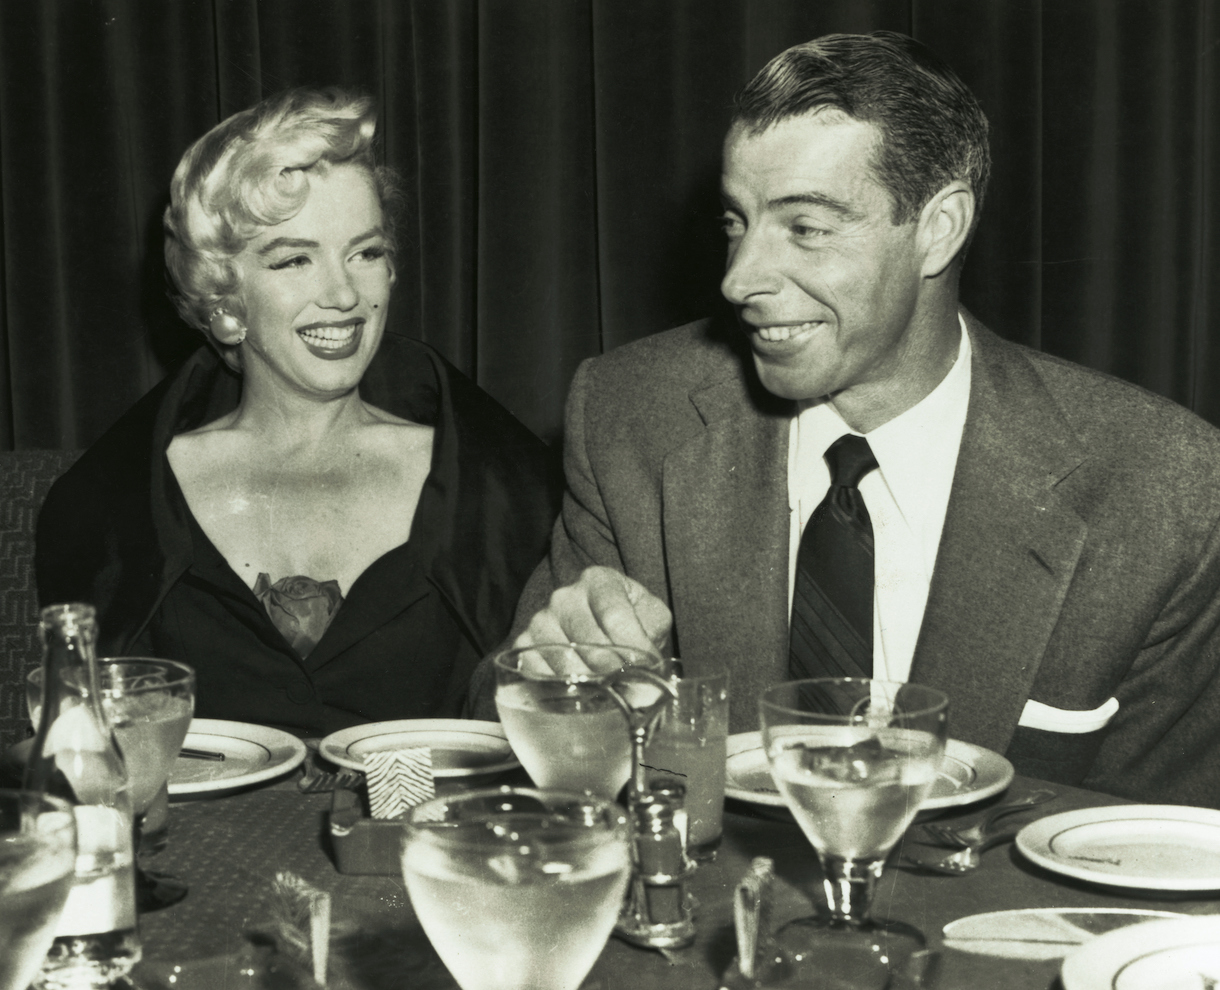 Exactly How Many Husbands Did Marilyn Monroe Have?